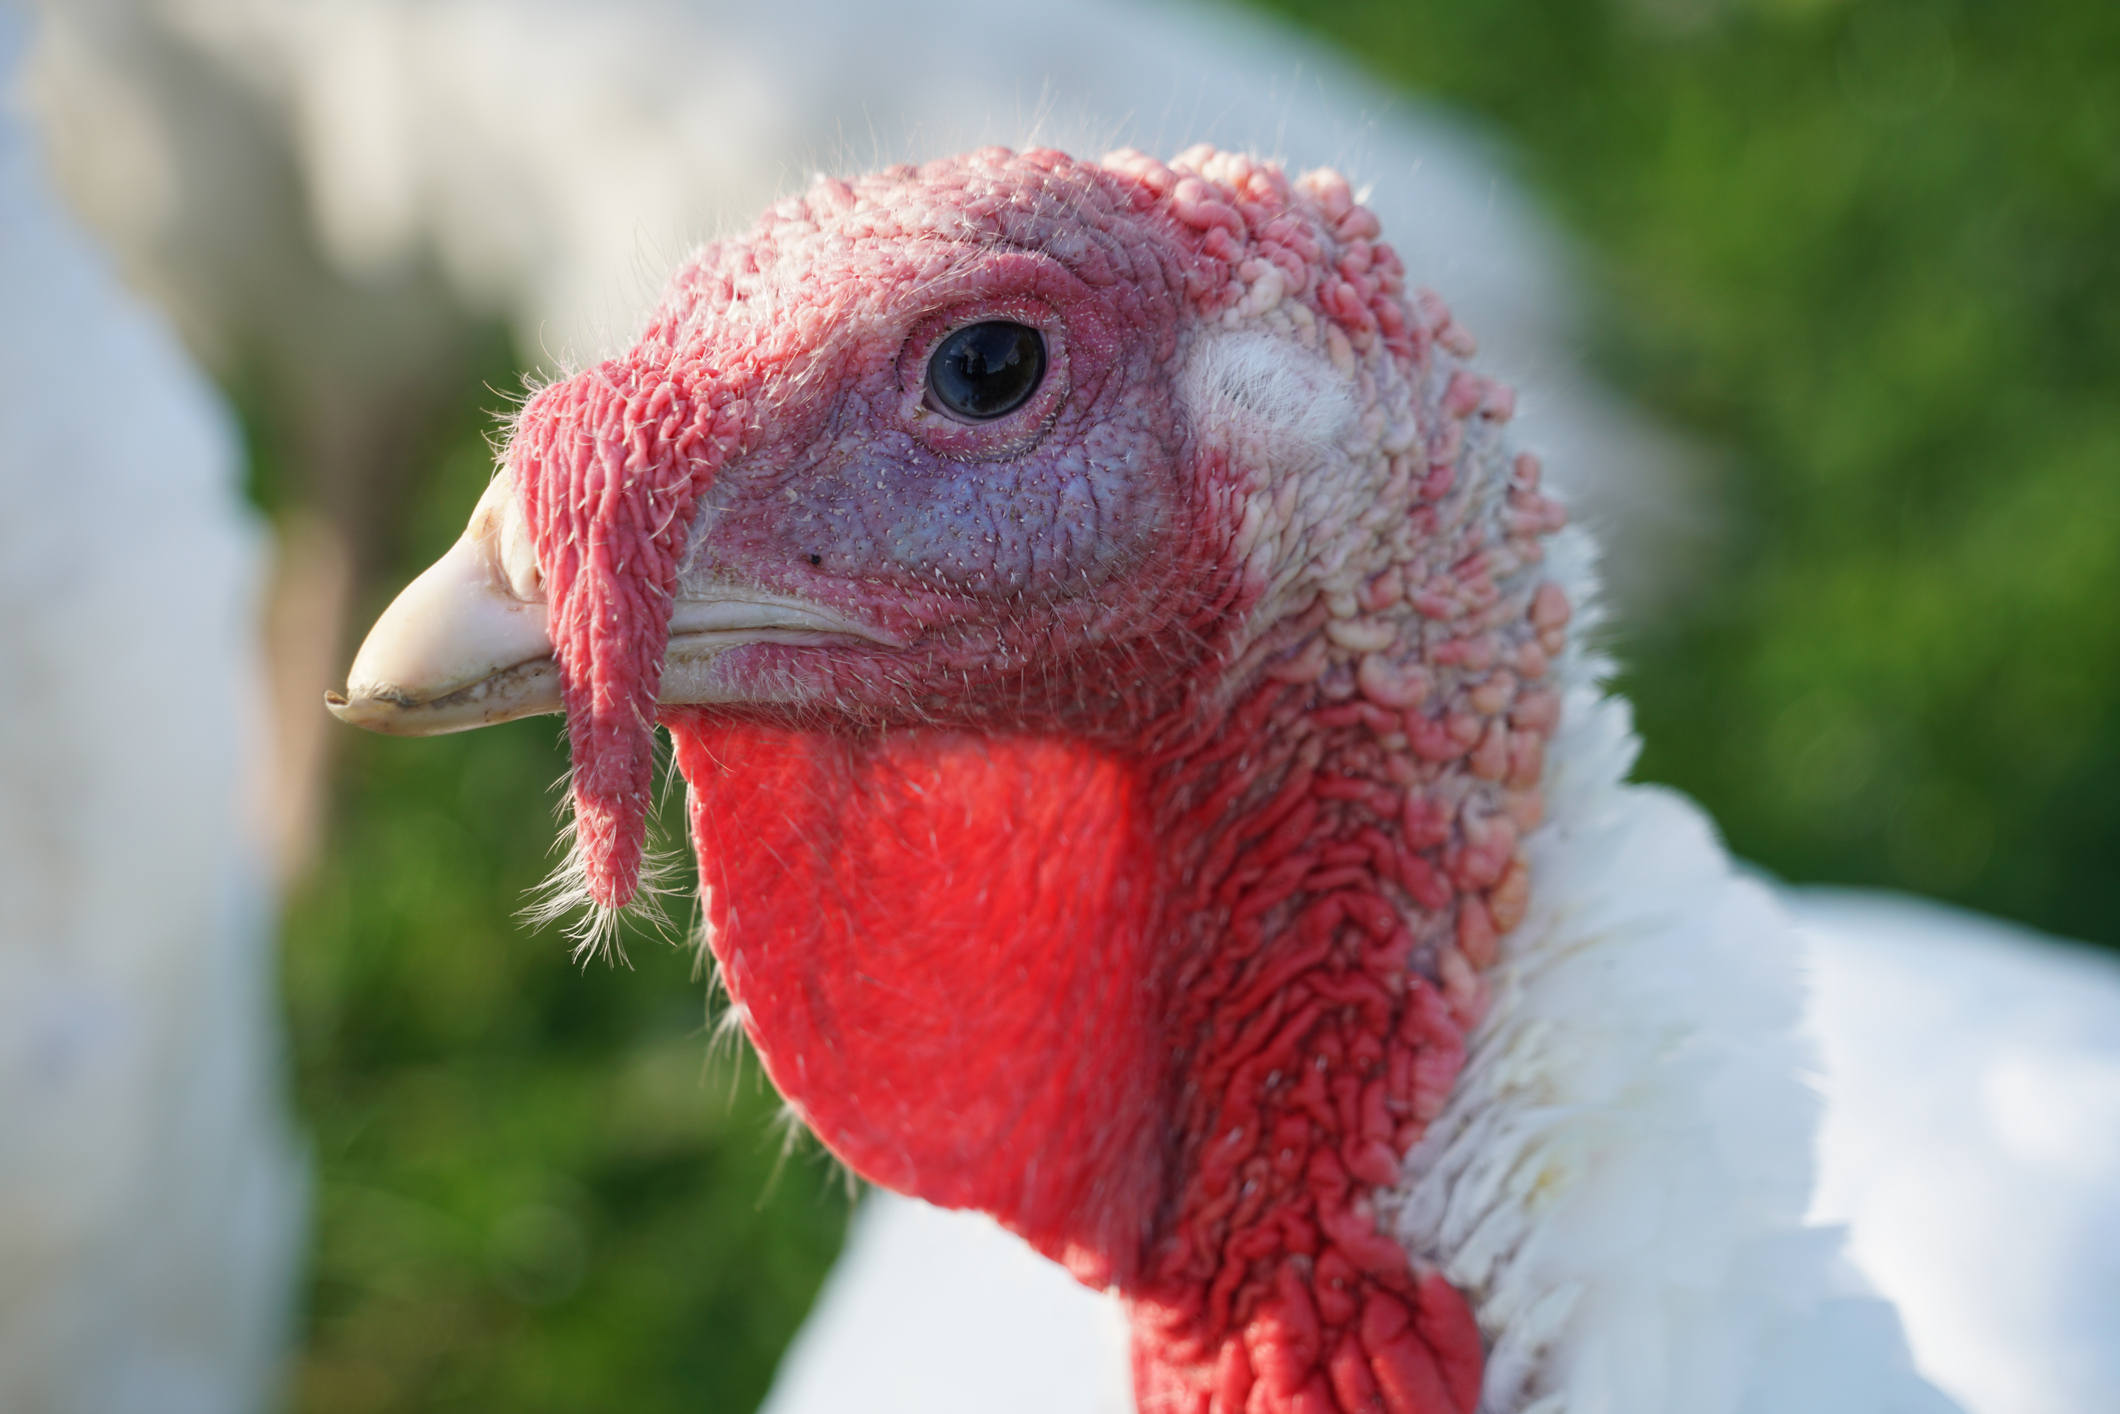 Dr. Darrick E. Antell, MD Blog | The Wattlectomy: Men Get rid of turkey neck this Thanksgiving with a Neck Lift